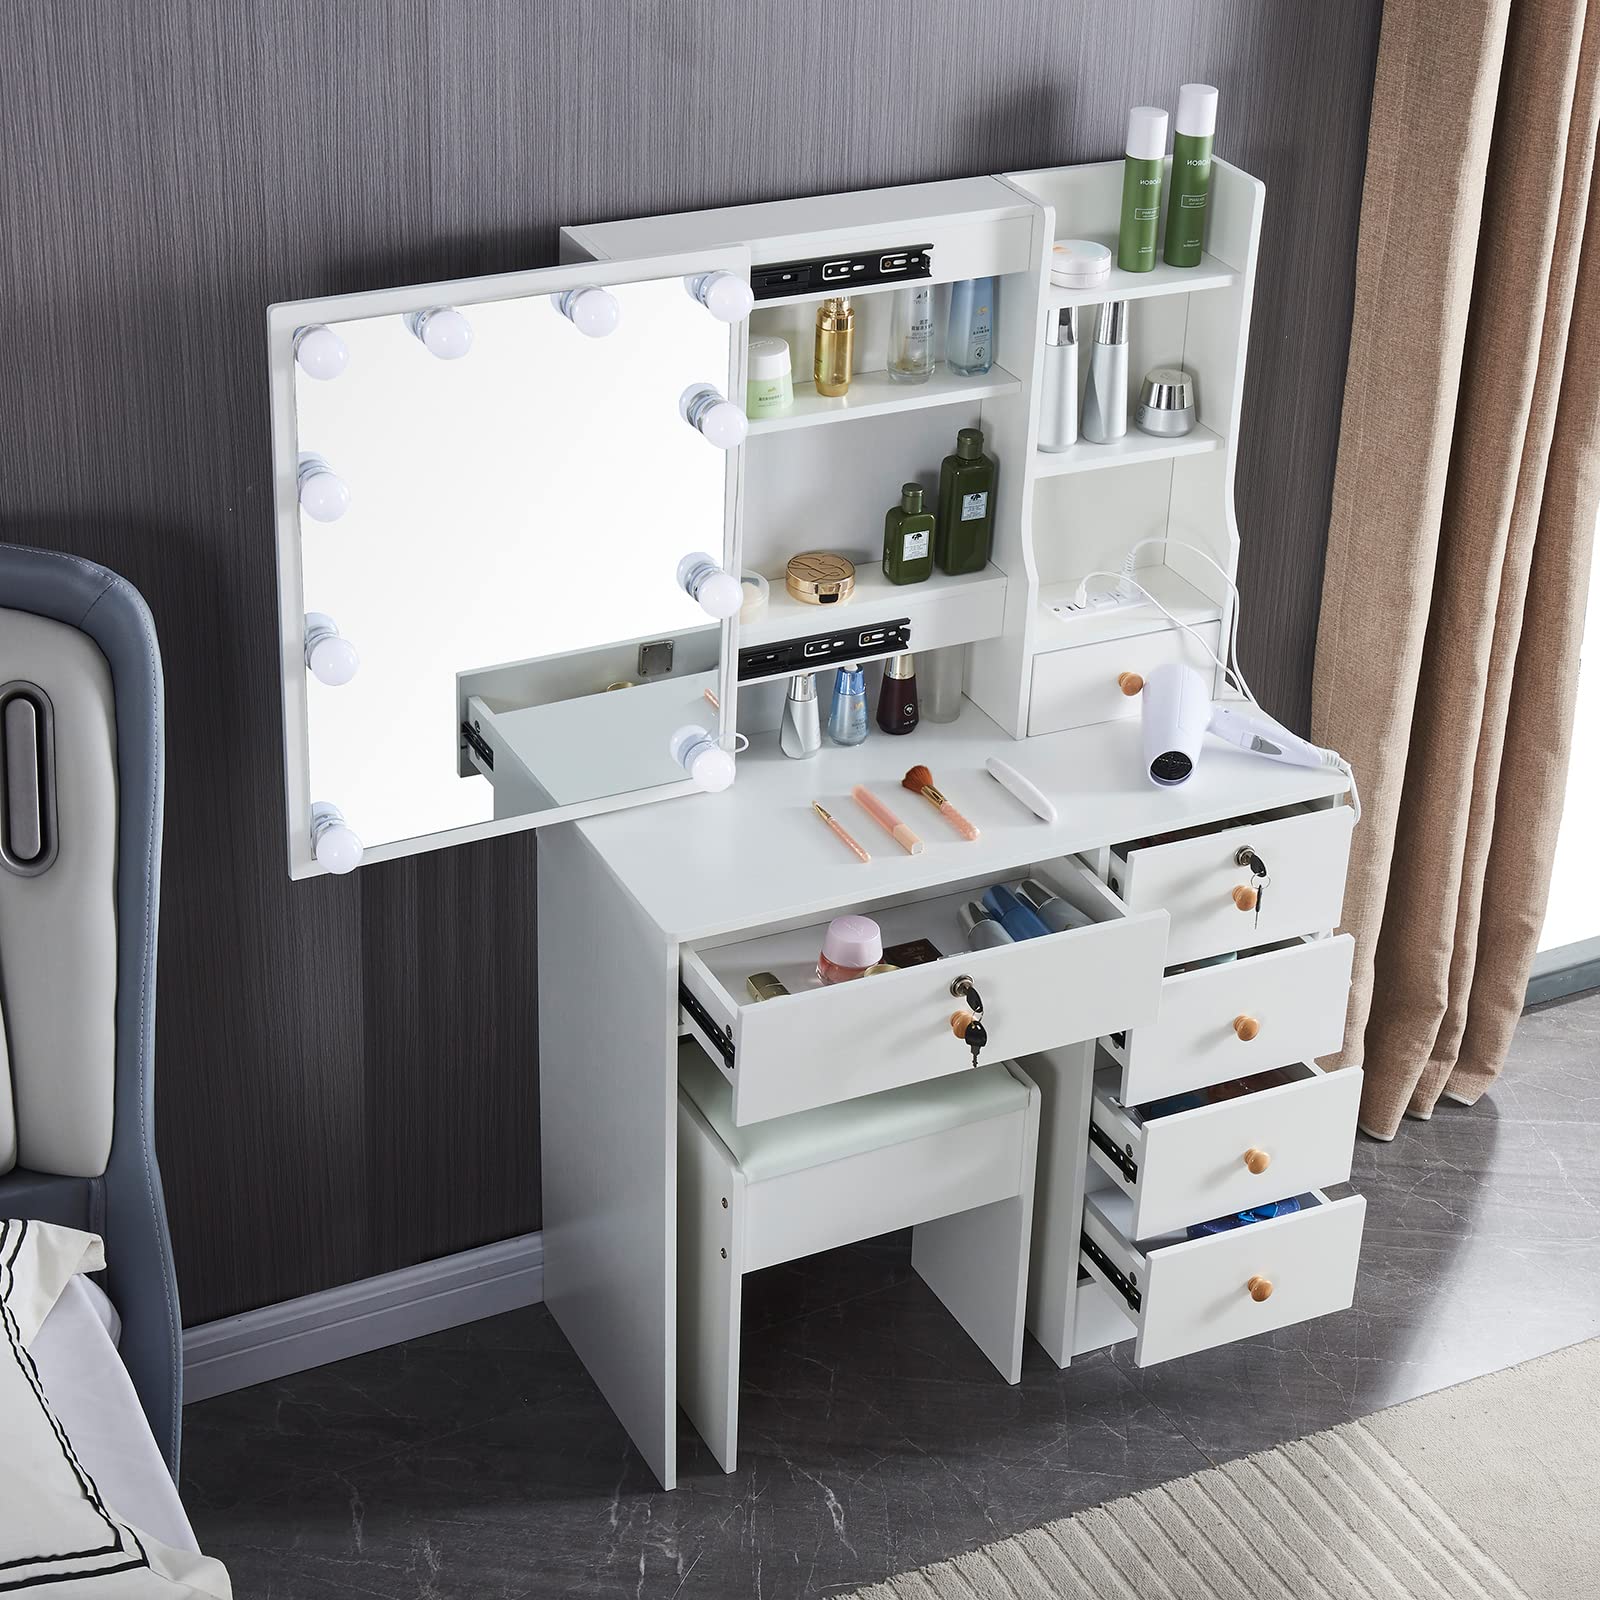 Saihemei Makeup Dressing Table with Sliding Mirror and Lights, 3 Color Modes Vanity Set with Storage Shelves and Chair, Makeup Table with Charging Station for Women Girls